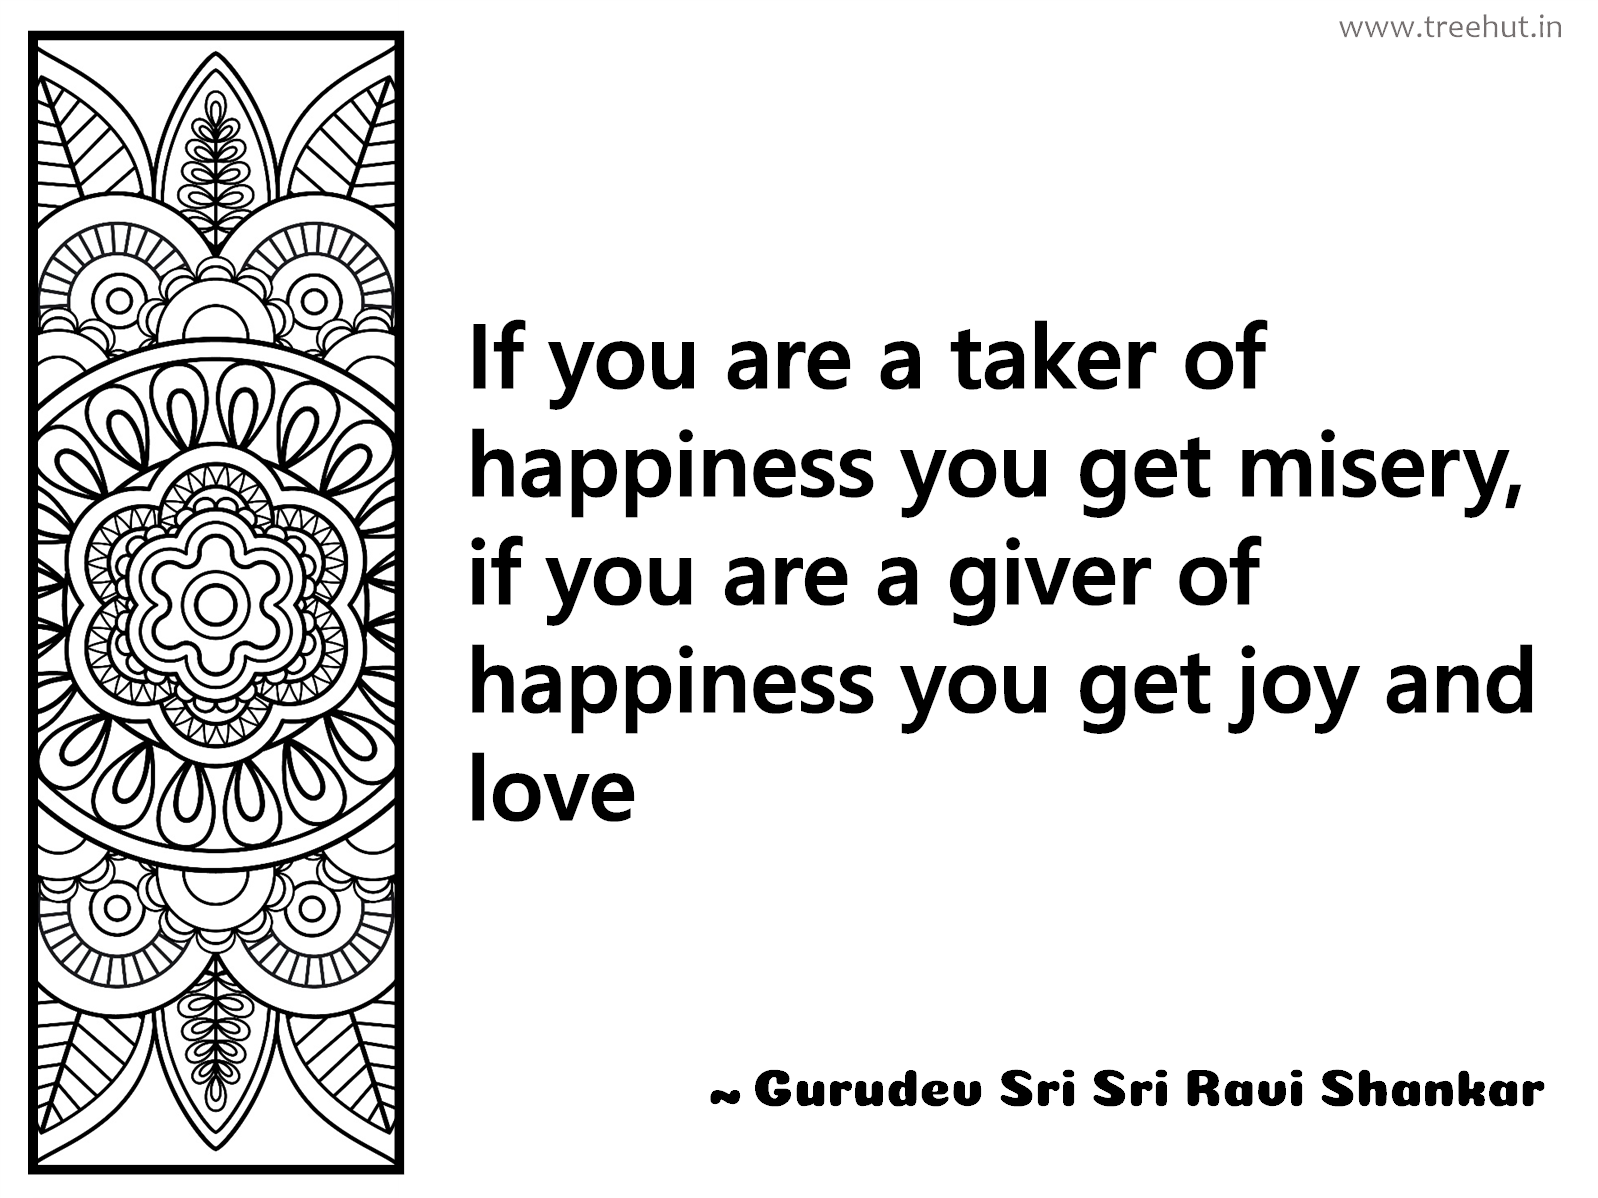 If you are a taker of happiness you get misery, if you are a giver of happiness you get joy and love Inspirational Quote by Gurudev Sri Sri Ravi Shankar, coloring pages